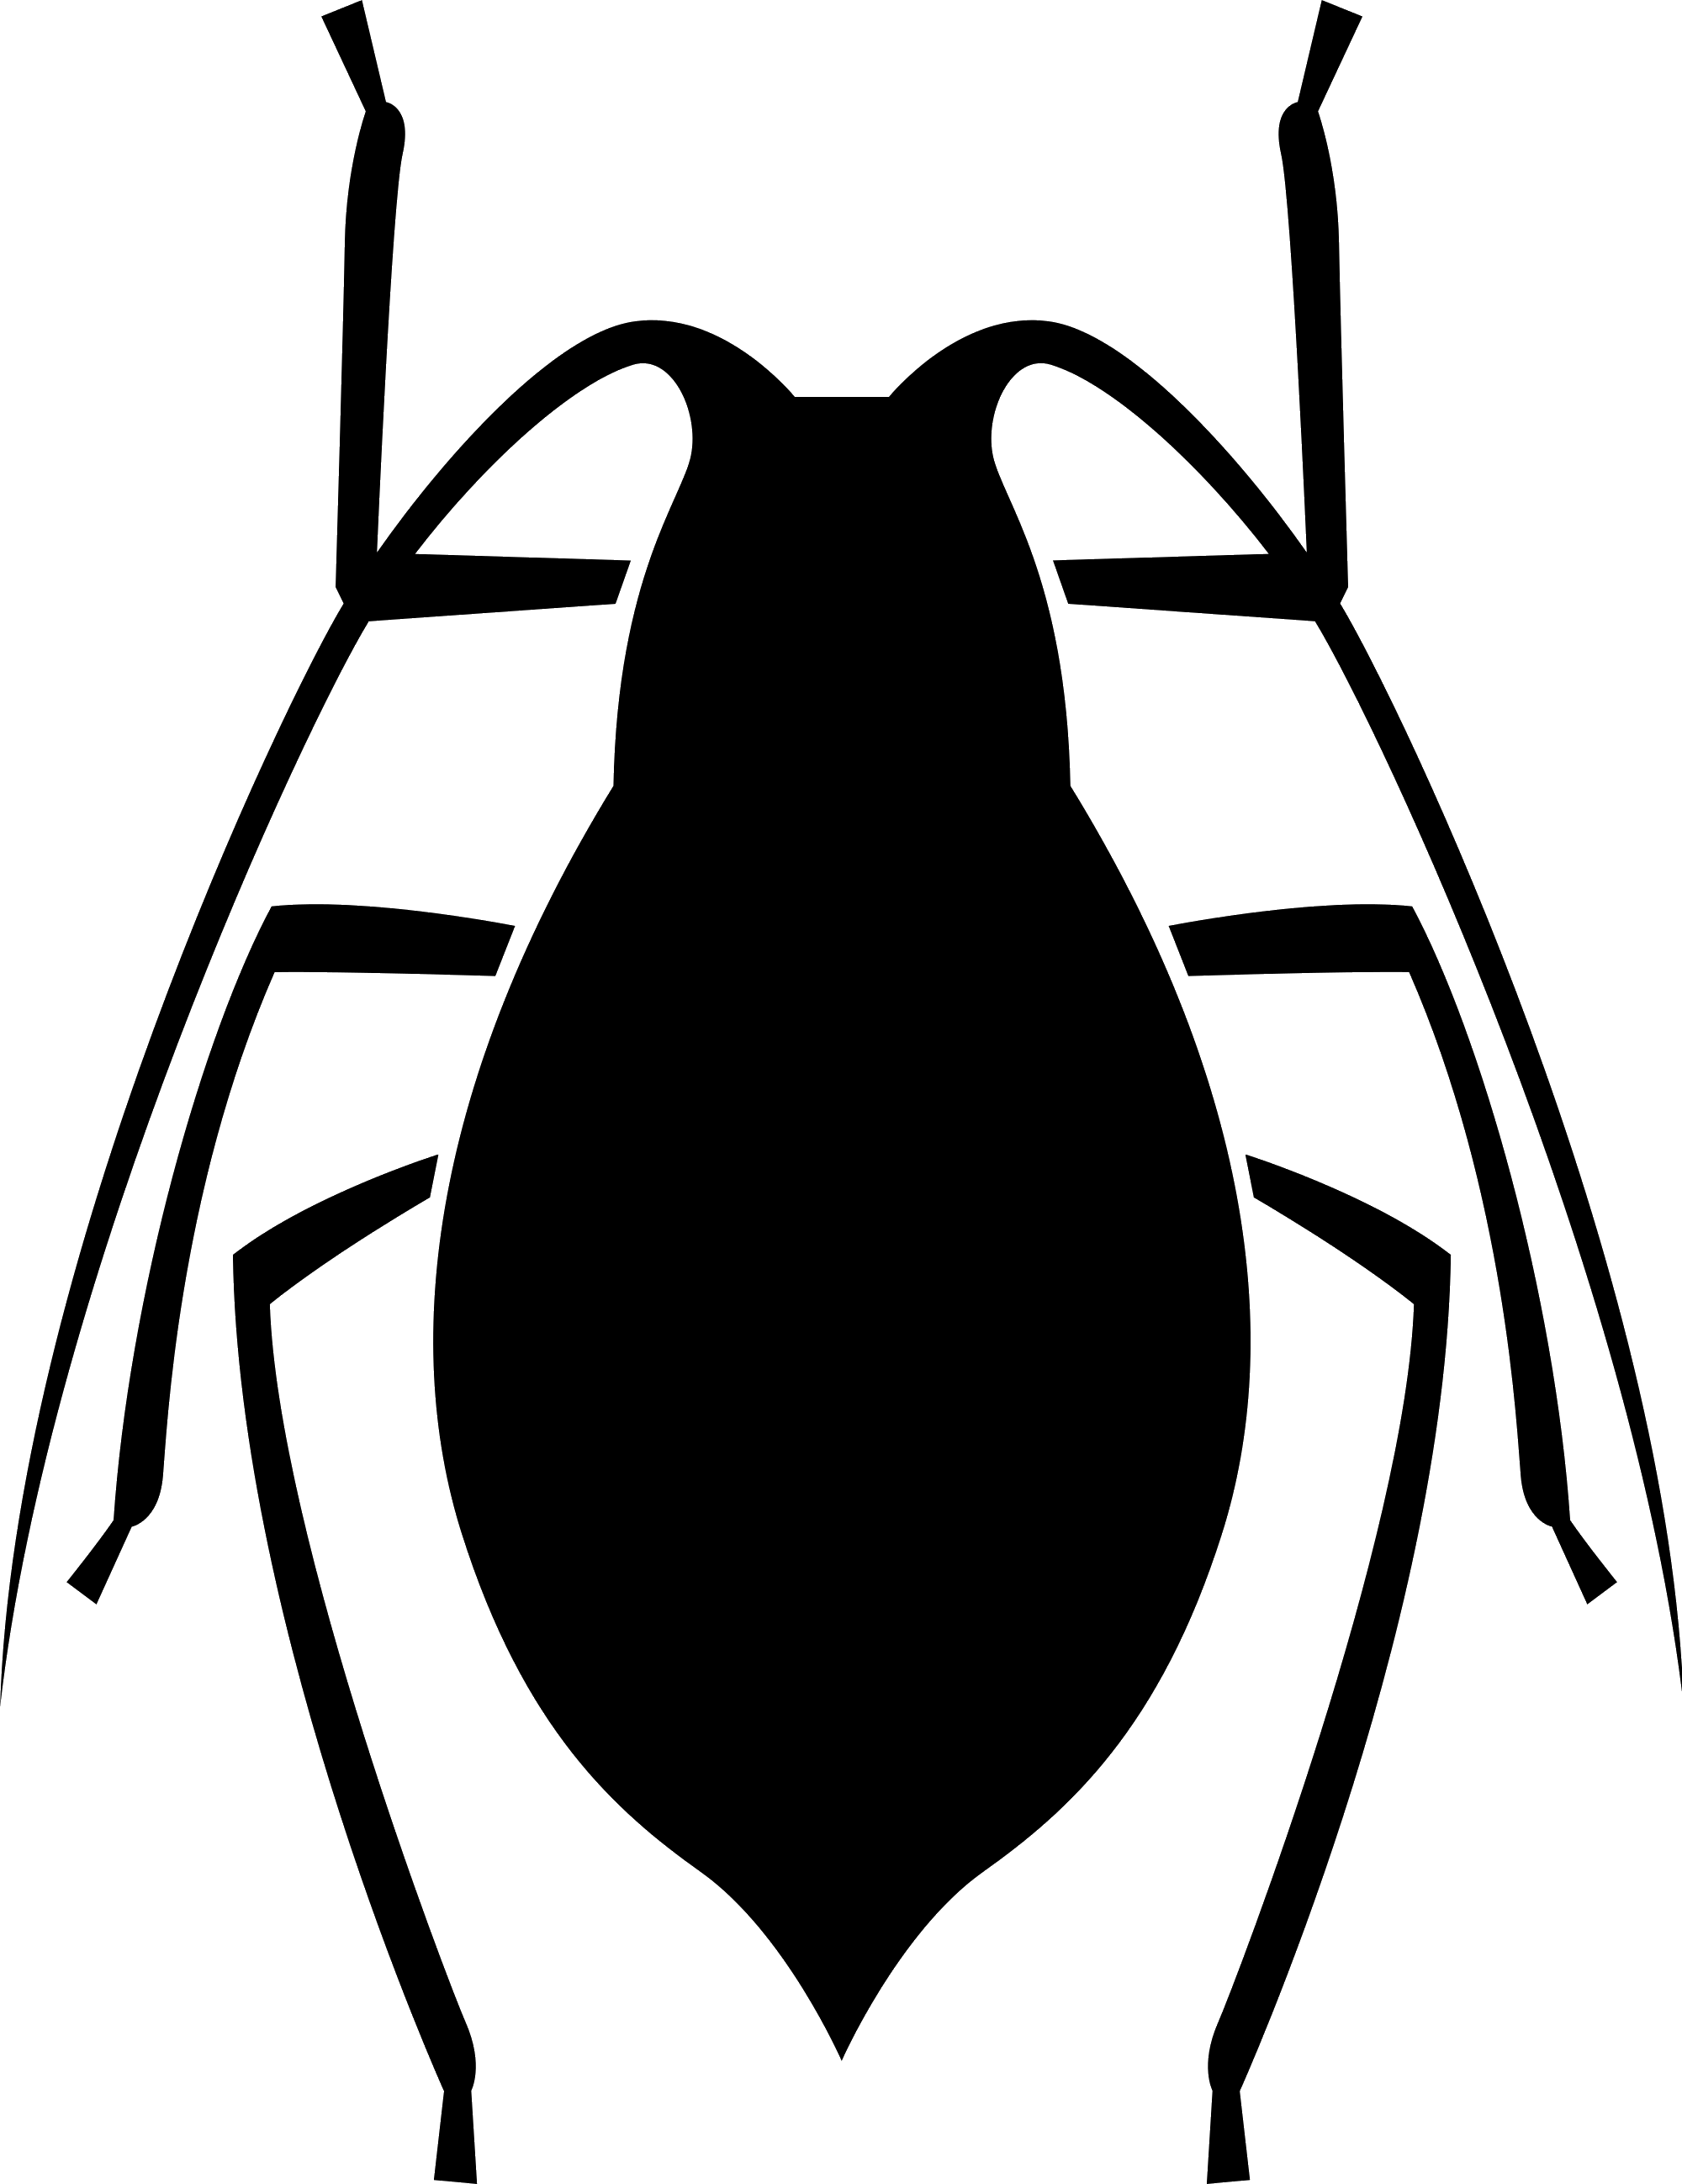 2000px-Bug_icon_-_Noun_project_198.svg.png